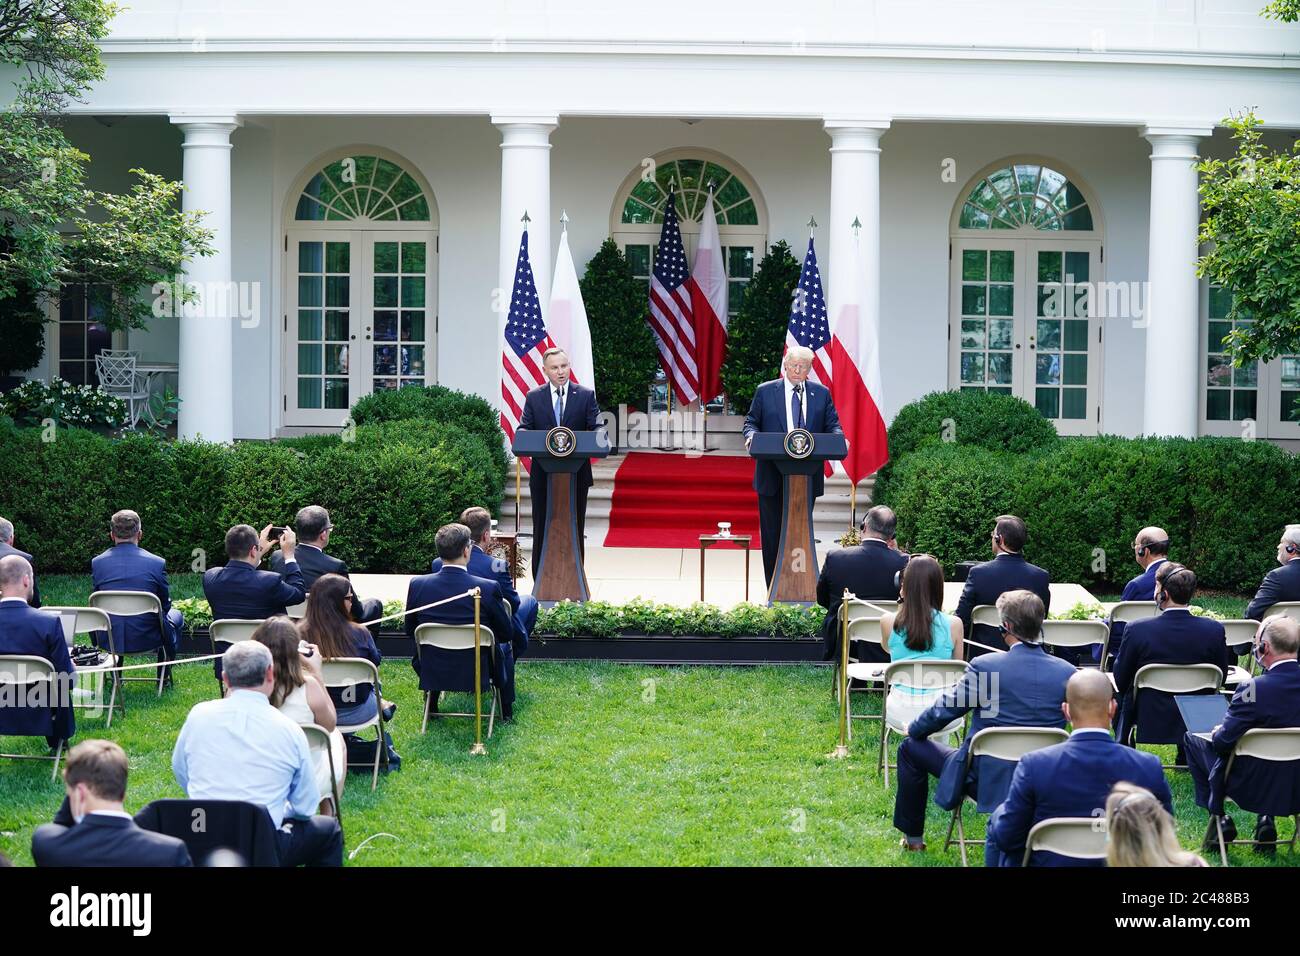 US President Donald J. Trump (R) and Polish President Andrzej Duda hold a joint press conference in the Rose Garden of the White House in Washington, DC, USA, 24 June 2020. Duda, a conservative nationalist facing a tight re-election race back home, is the first foreign leader to visit the White House in more than three months.Credit: Jim LoScalzo/Pool via CNP /MediaPunch Stock Photo